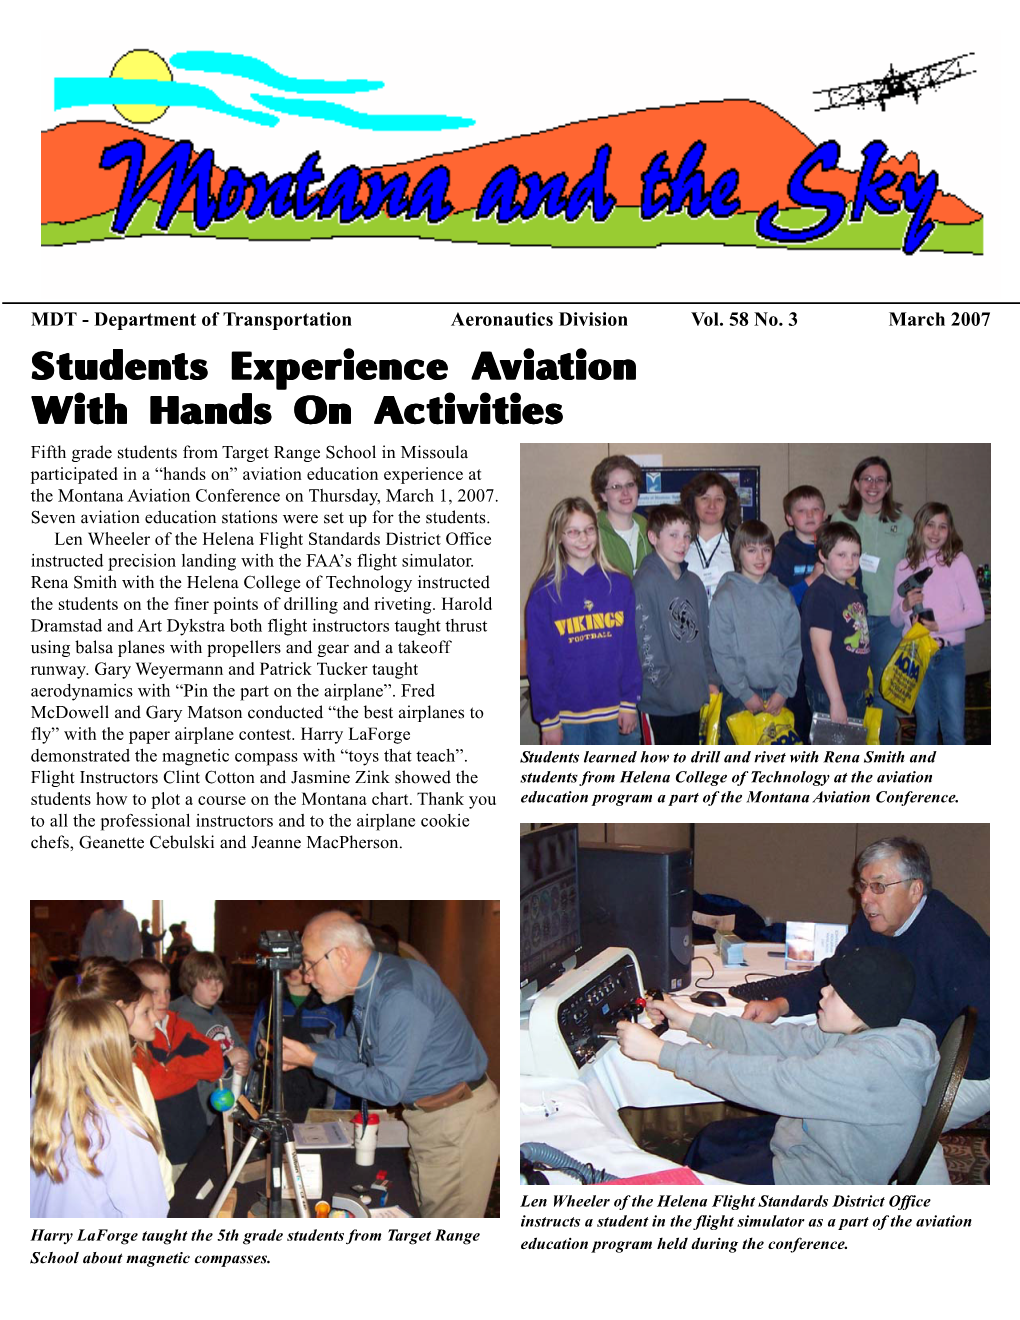 2007 Montana Aviation Conference Another Success Story!